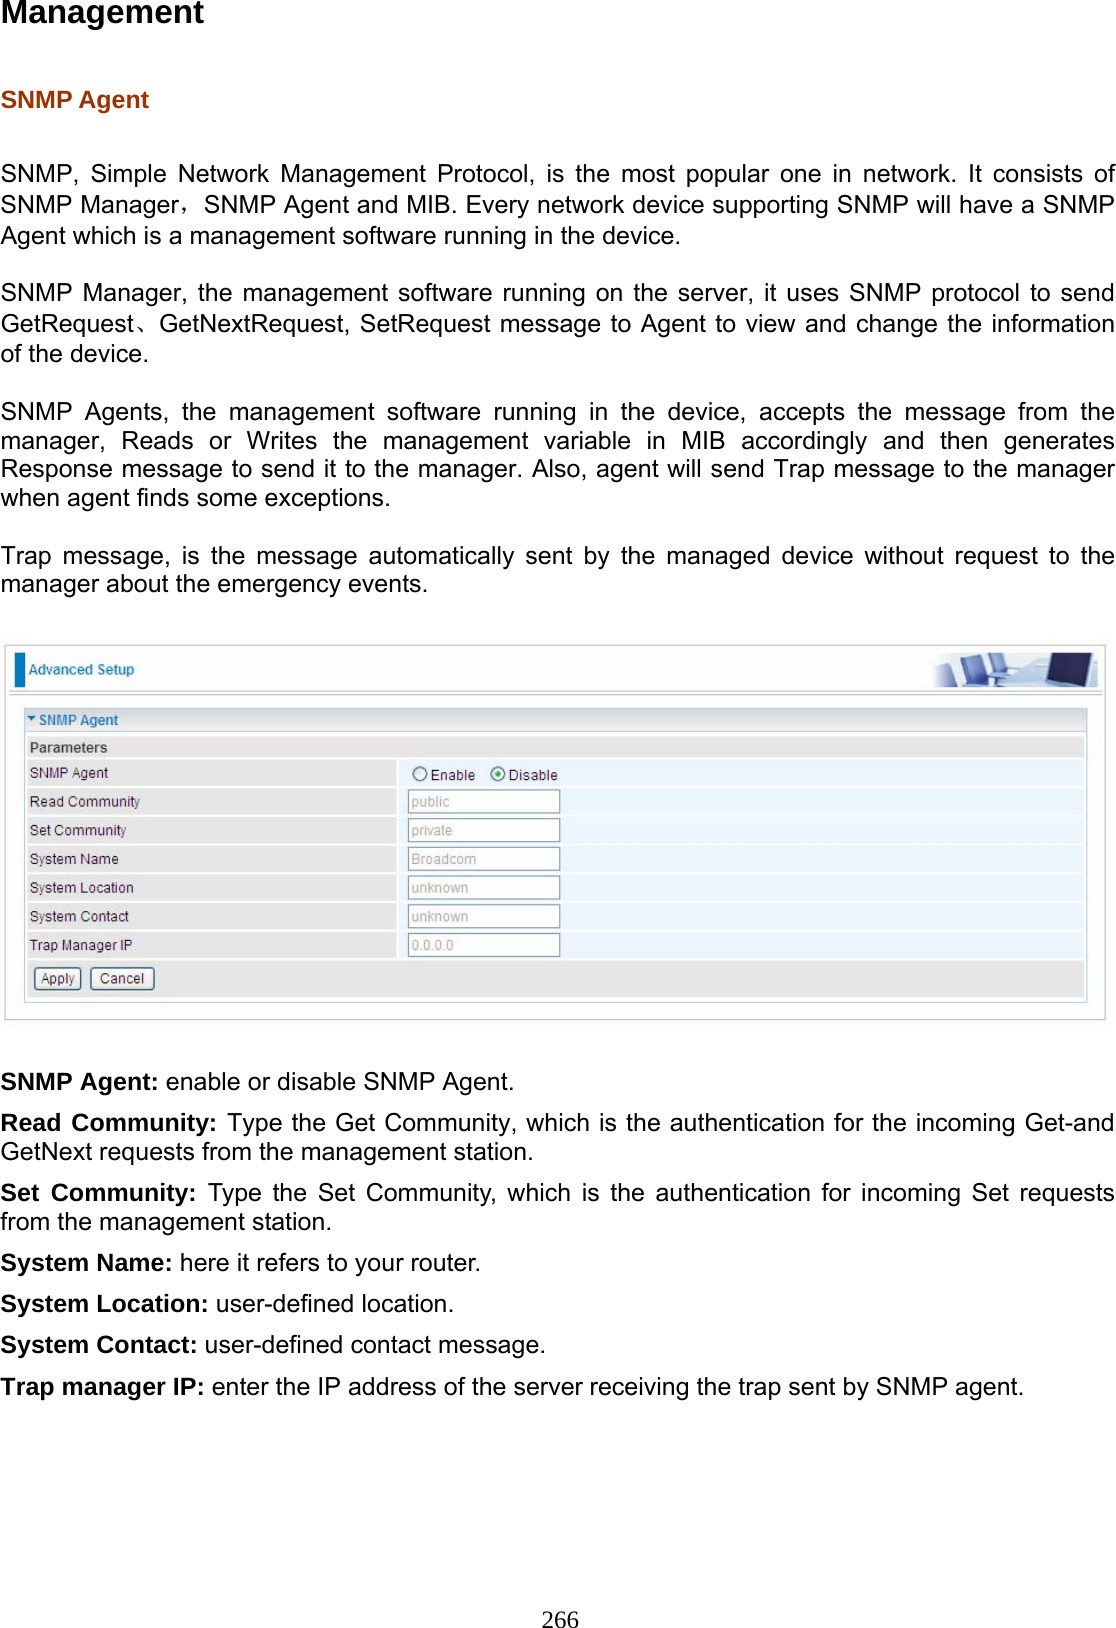 266 Management  SNMP Agent   SNMP, Simple Network Management Protocol, is the most popular one in network. It consists of SNMP Manager，SNMP Agent and MIB. Every network device supporting SNMP will have a SNMP Agent which is a management software running in the device.   SNMP Manager, the management software running on the server, it uses SNMP protocol to send GetRequest、GetNextRequest, SetRequest message to Agent to view and change the information of the device.  SNMP Agents, the management software running in the device, accepts the message from the manager, Reads or Writes the management variable in MIB accordingly and then generates Response message to send it to the manager. Also, agent will send Trap message to the manager when agent finds some exceptions.   Trap message, is the message automatically sent by the managed device without request to the manager about the emergency events.    SNMP Agent: enable or disable SNMP Agent.  Read Community: Type the Get Community, which is the authentication for the incoming Get-and GetNext requests from the management station.  Set Community: Type the Set Community, which is the authentication for incoming Set requests from the management station.  System Name: here it refers to your router. System Location: user-defined location. System Contact: user-defined contact message. Trap manager IP: enter the IP address of the server receiving the trap sent by SNMP agent.   